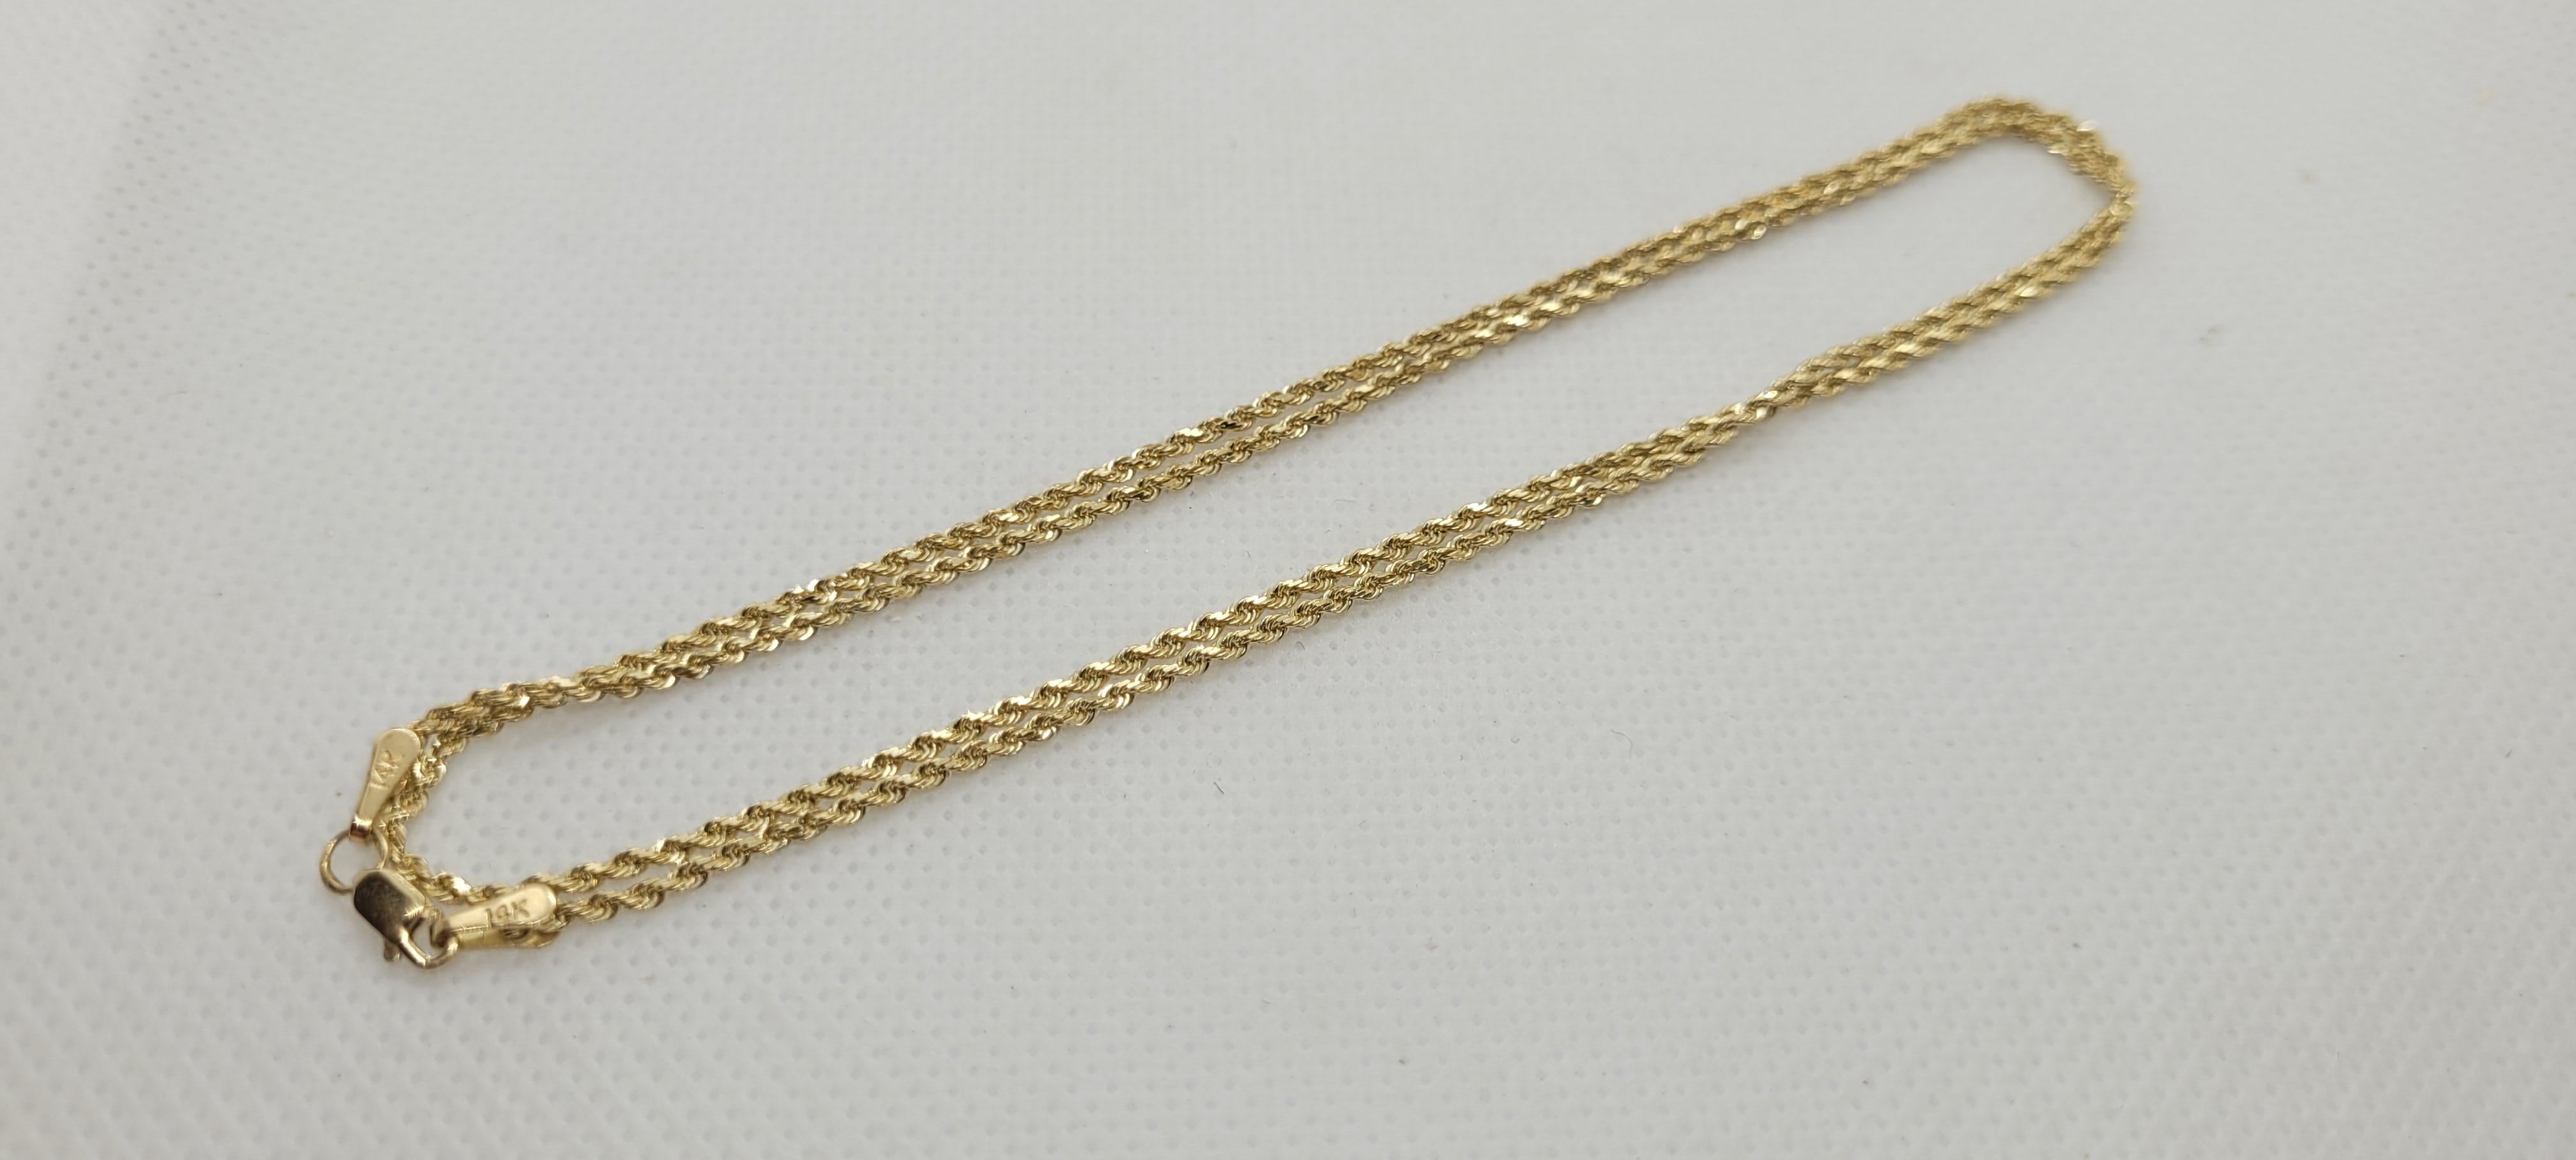 Modern 14kt Gold Rope Chain, 20 Inch Length, 1.6mm, 4.8 Grams, Bailey Banks Biddle For Sale